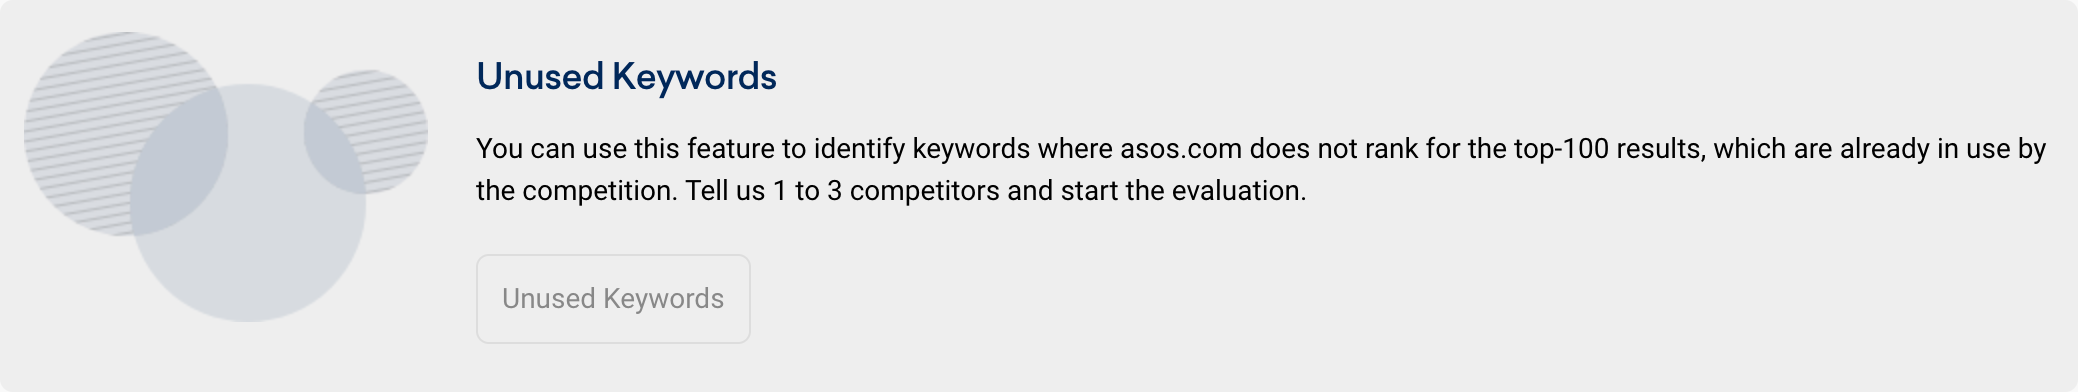 The introduction box for the feature "Unused Keywords" in the "Opportunities" section in SISTRIX.